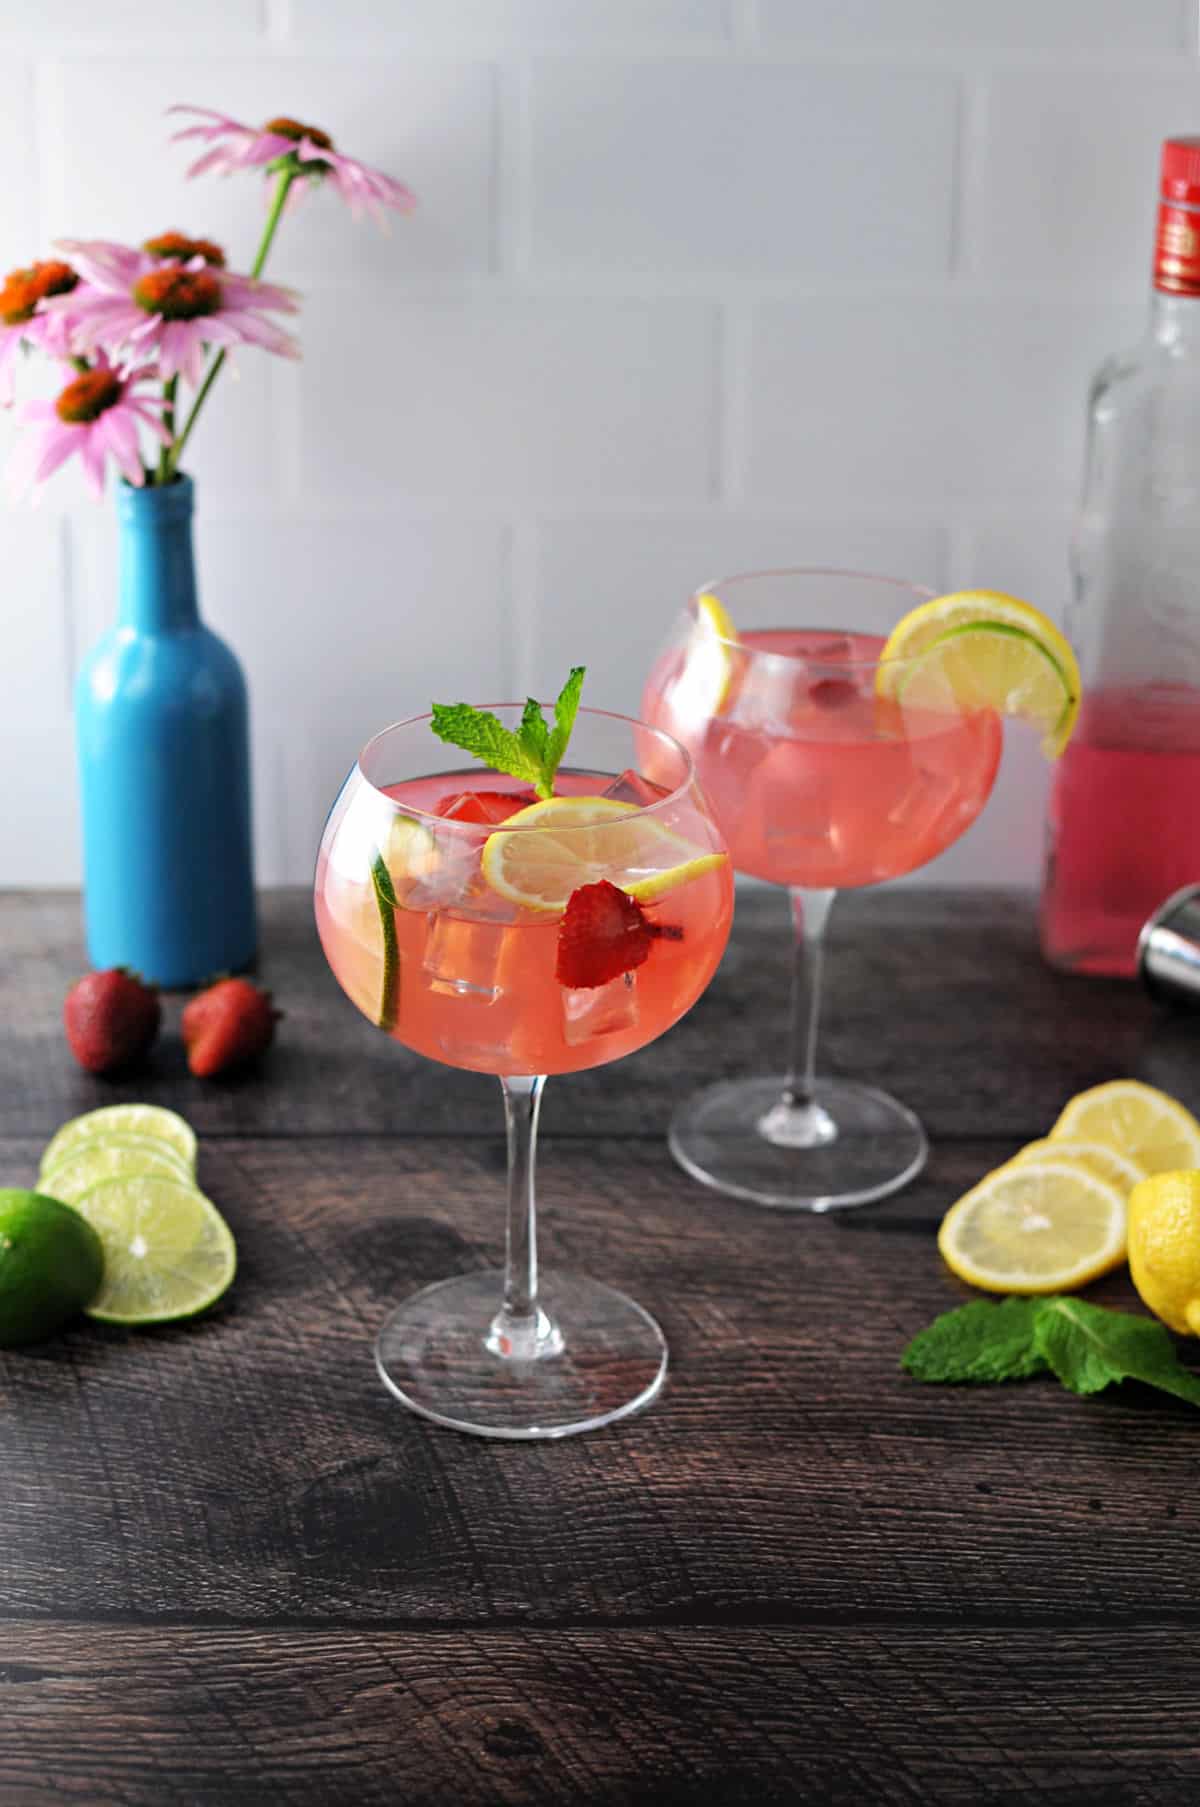 2 wine glasses of pink gin and lemonade cocktails surrounded by lemon and lime slices and a blue vase with flowers behind